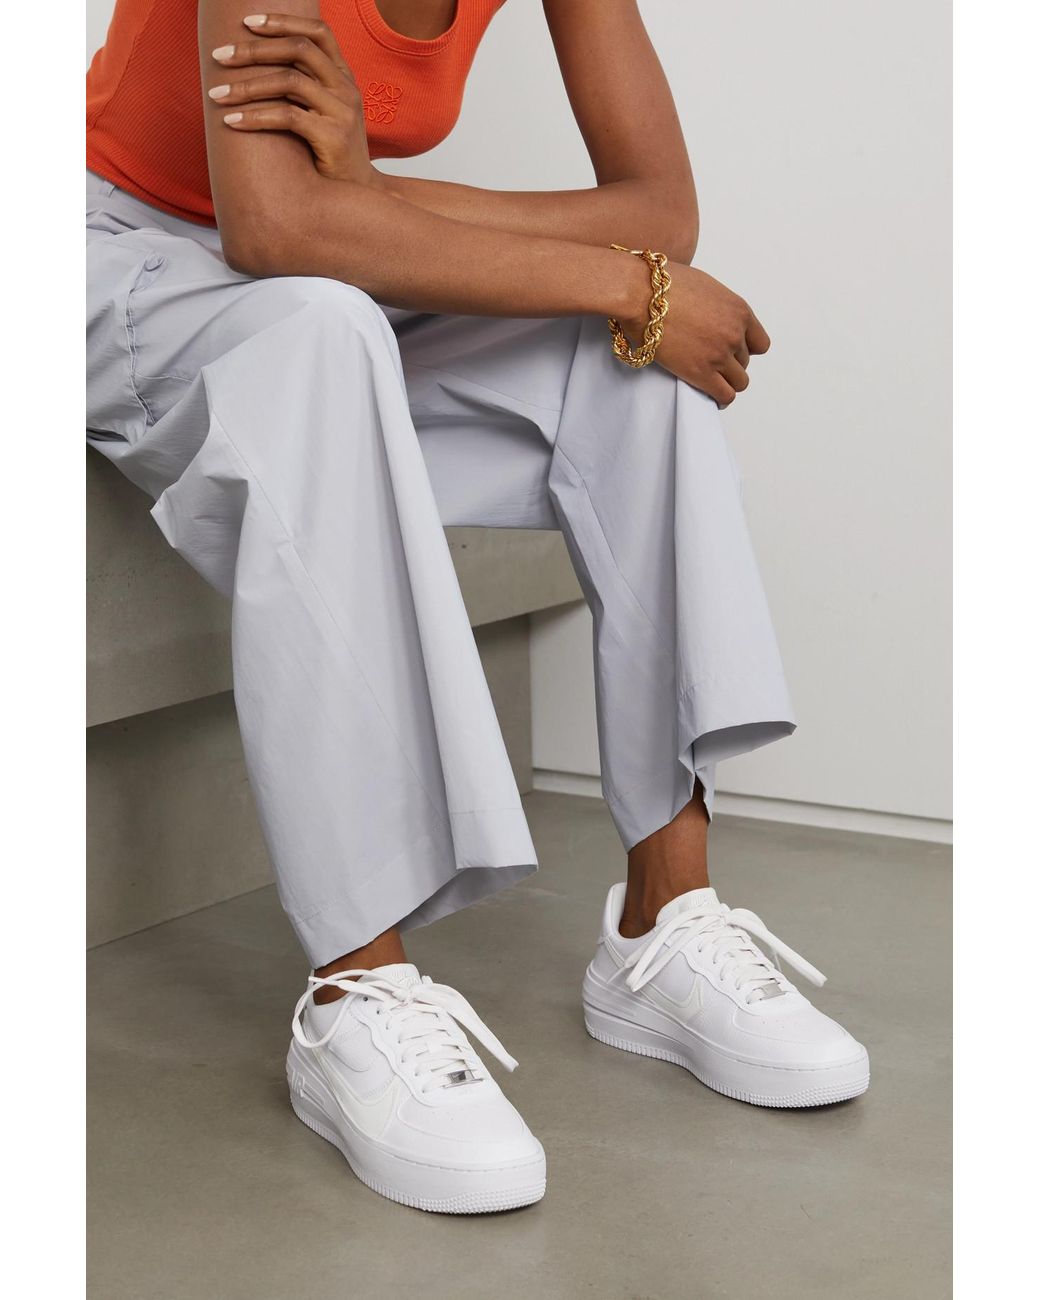 Nike Air Force 1 Shadow Leather Platform Sneakers in White | Lyst